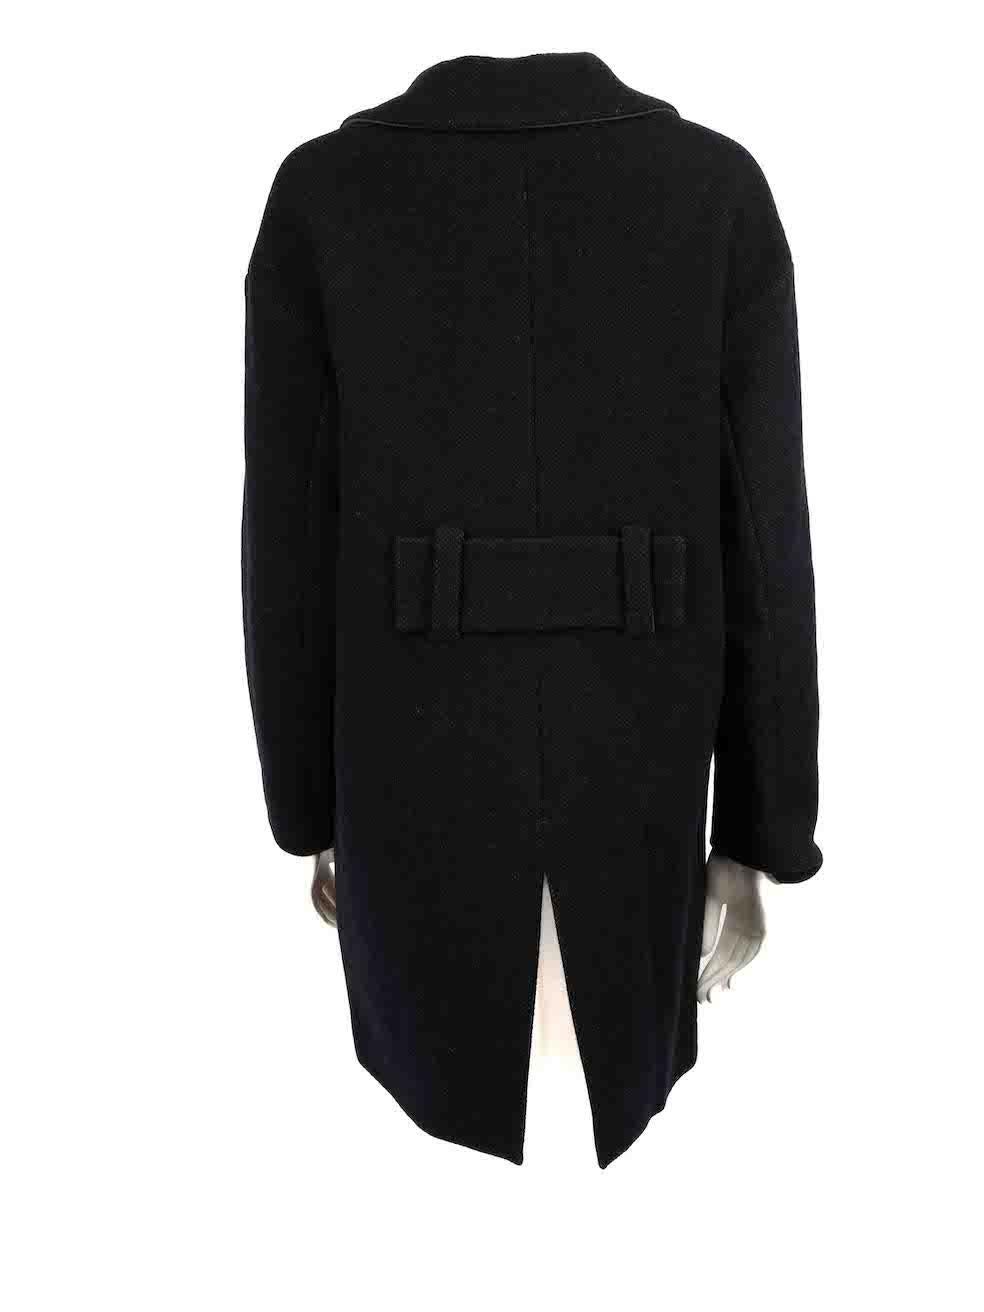 Agnona Black Wool Button Up Coat Size S In Excellent Condition For Sale In London, GB